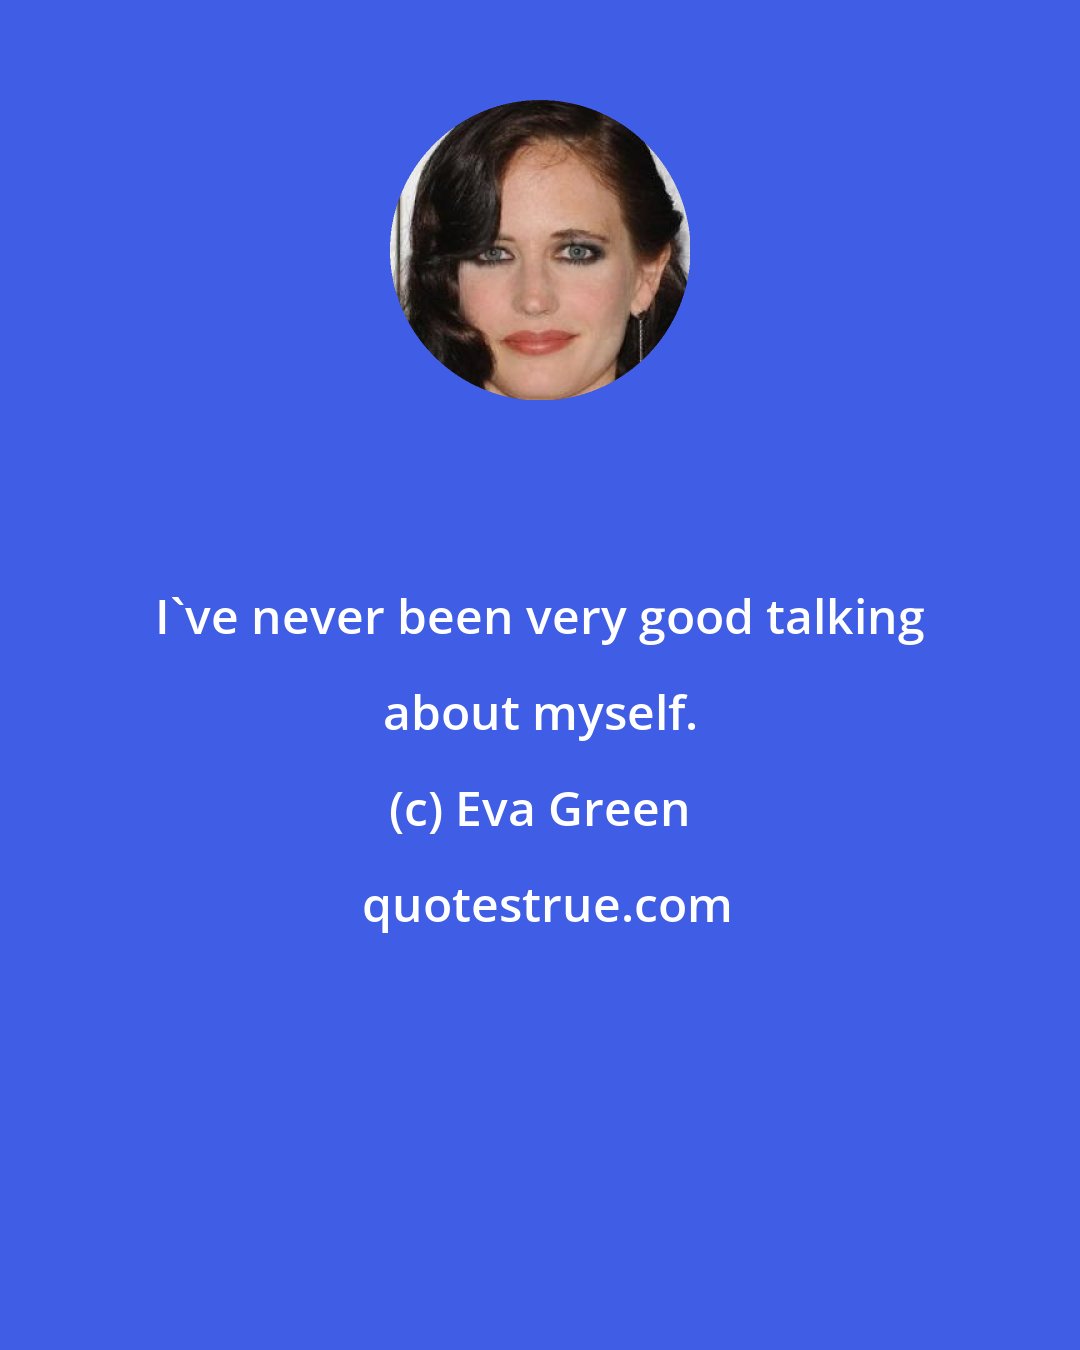 Eva Green: I've never been very good talking about myself.